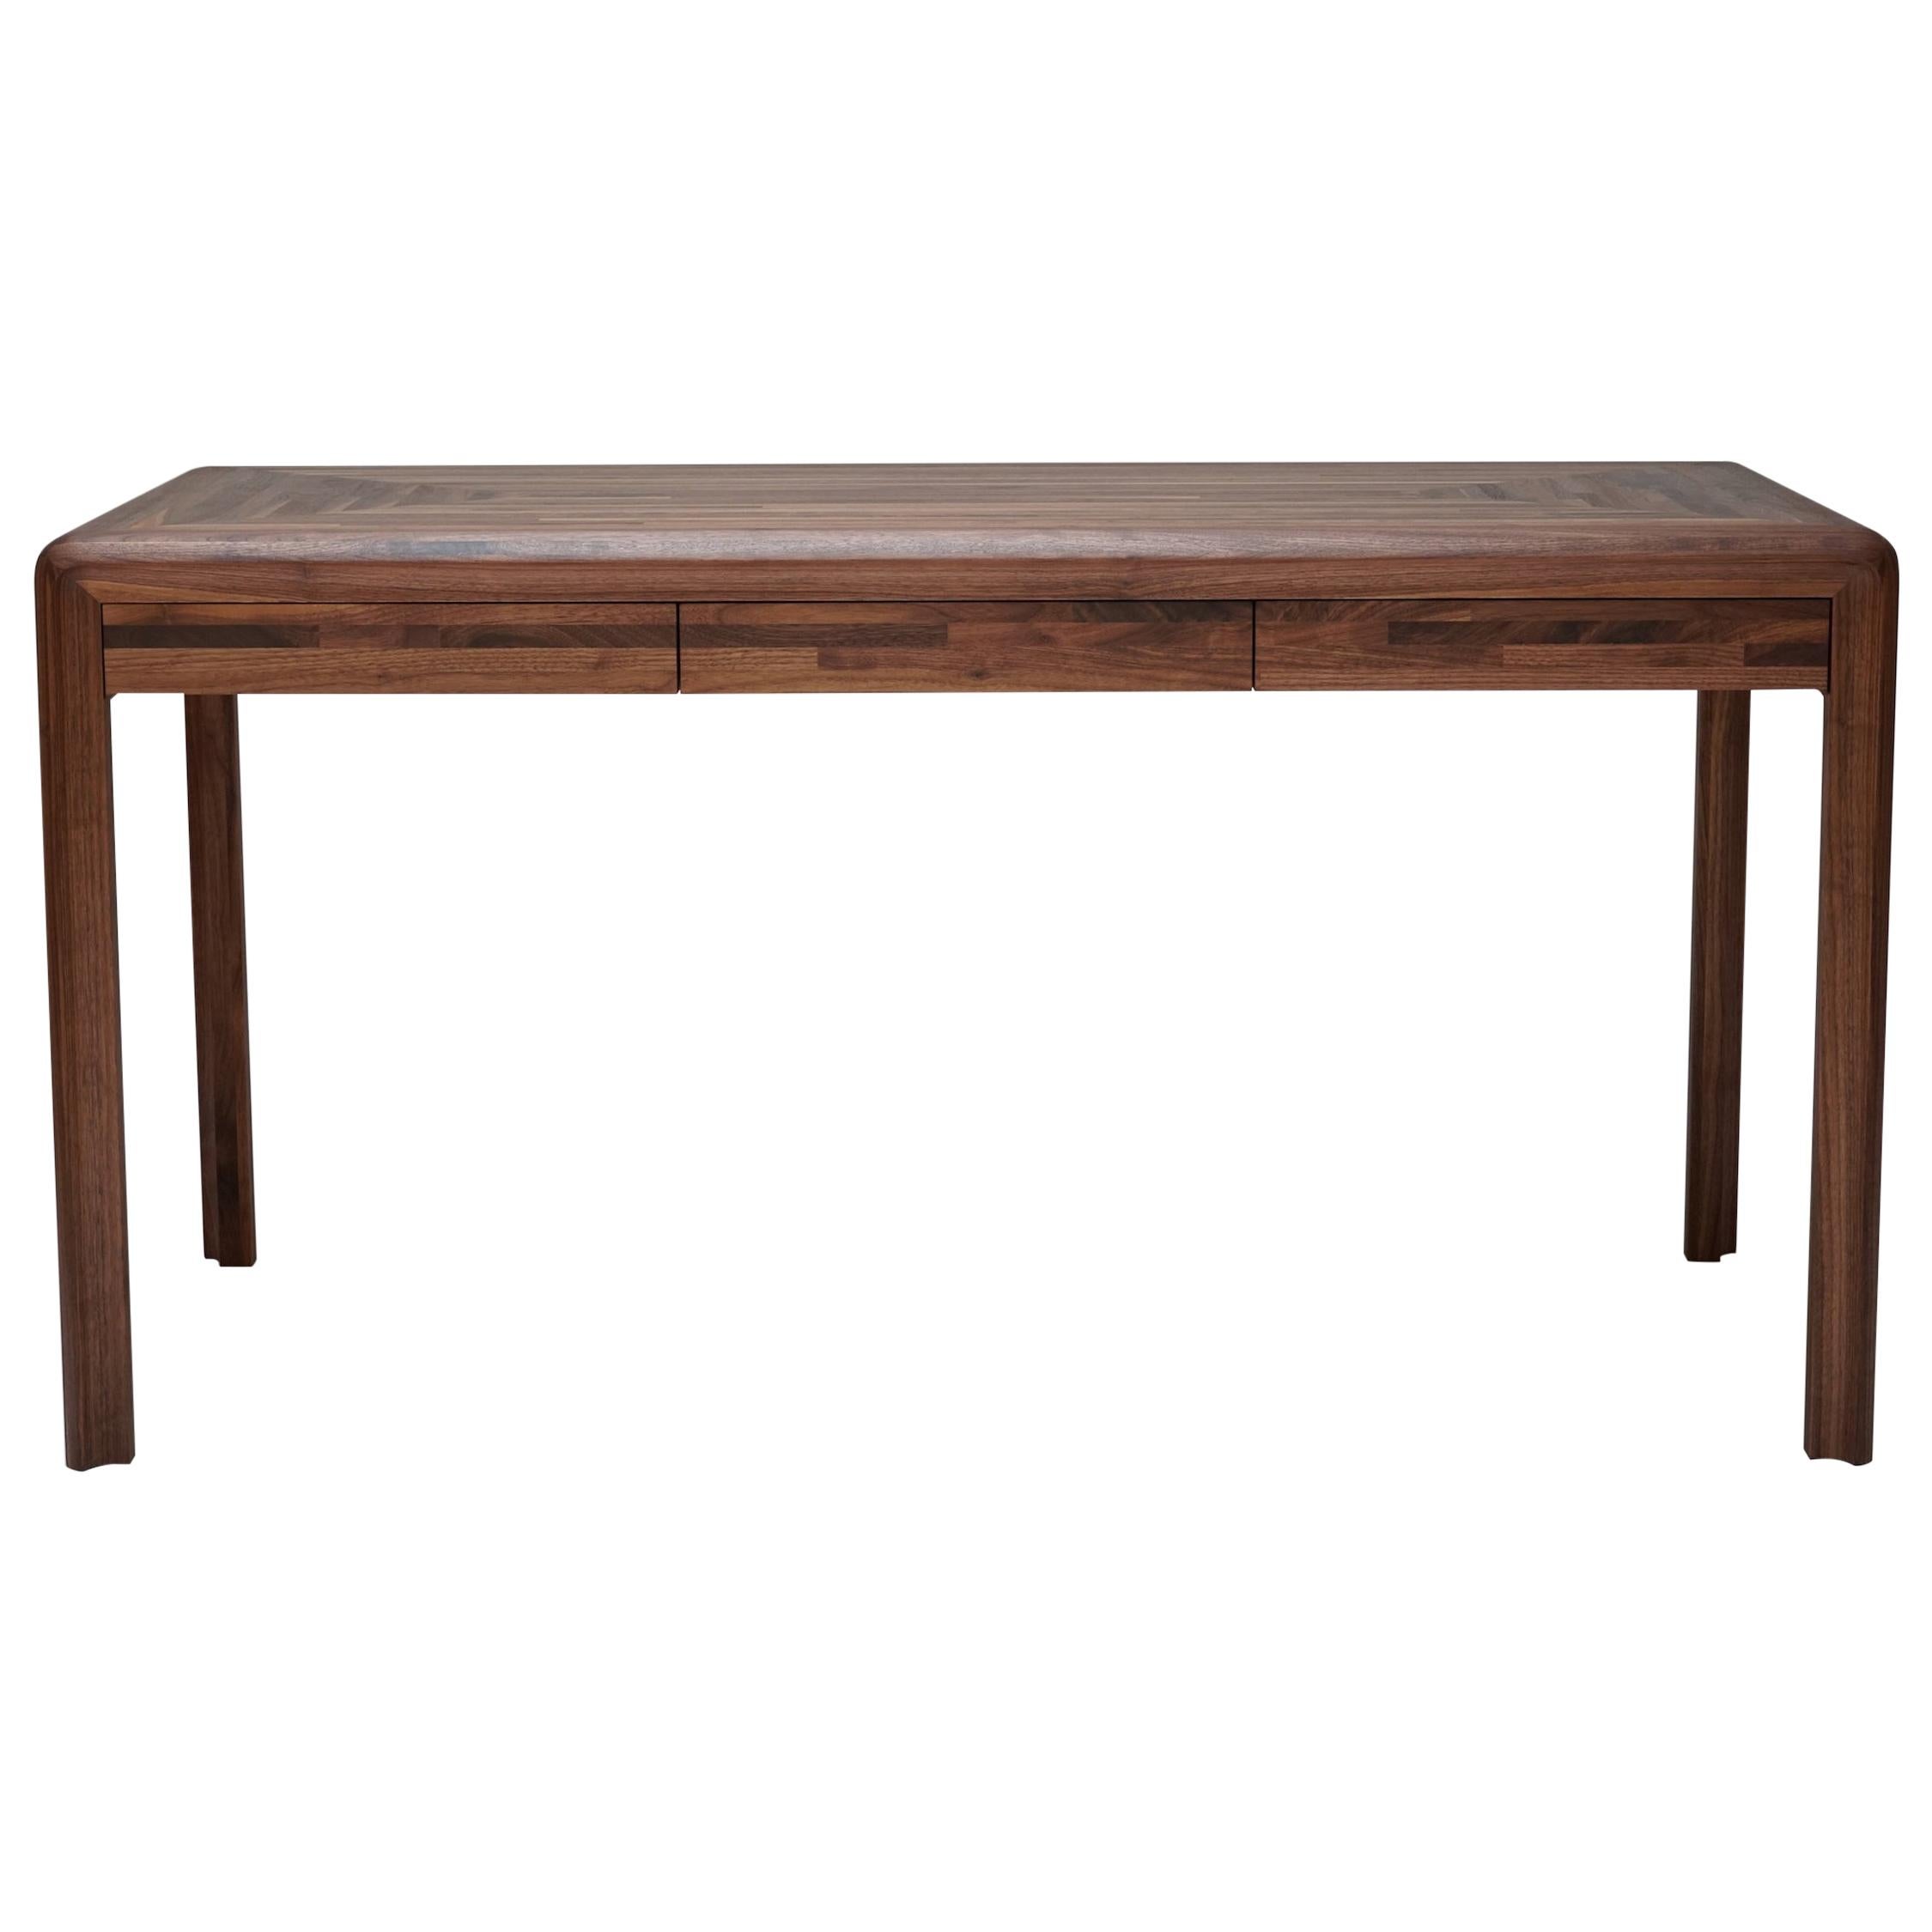 Radiused outer edges and a scalloped inner edge create a contrasting profile that adorns this minimal desk. Made from hand oiled solid walnut, this desk blends simple lines with unique subtle details. Three deep drawers with recessed pulls offer